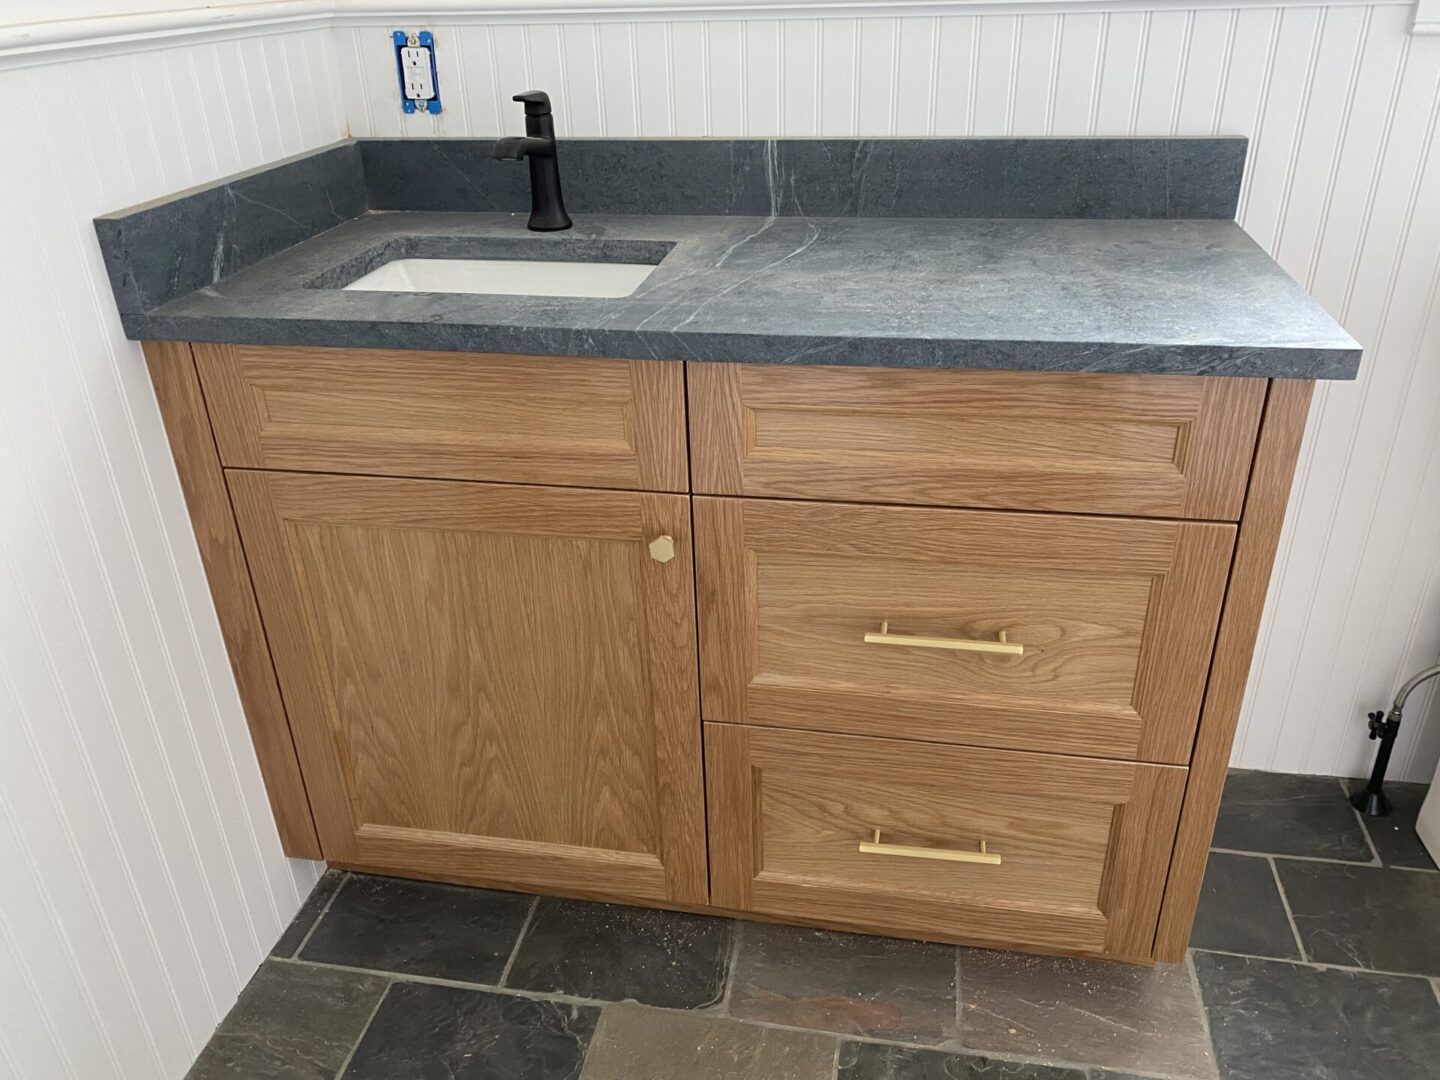 A wooden cabinet with sink on top under cnstruction